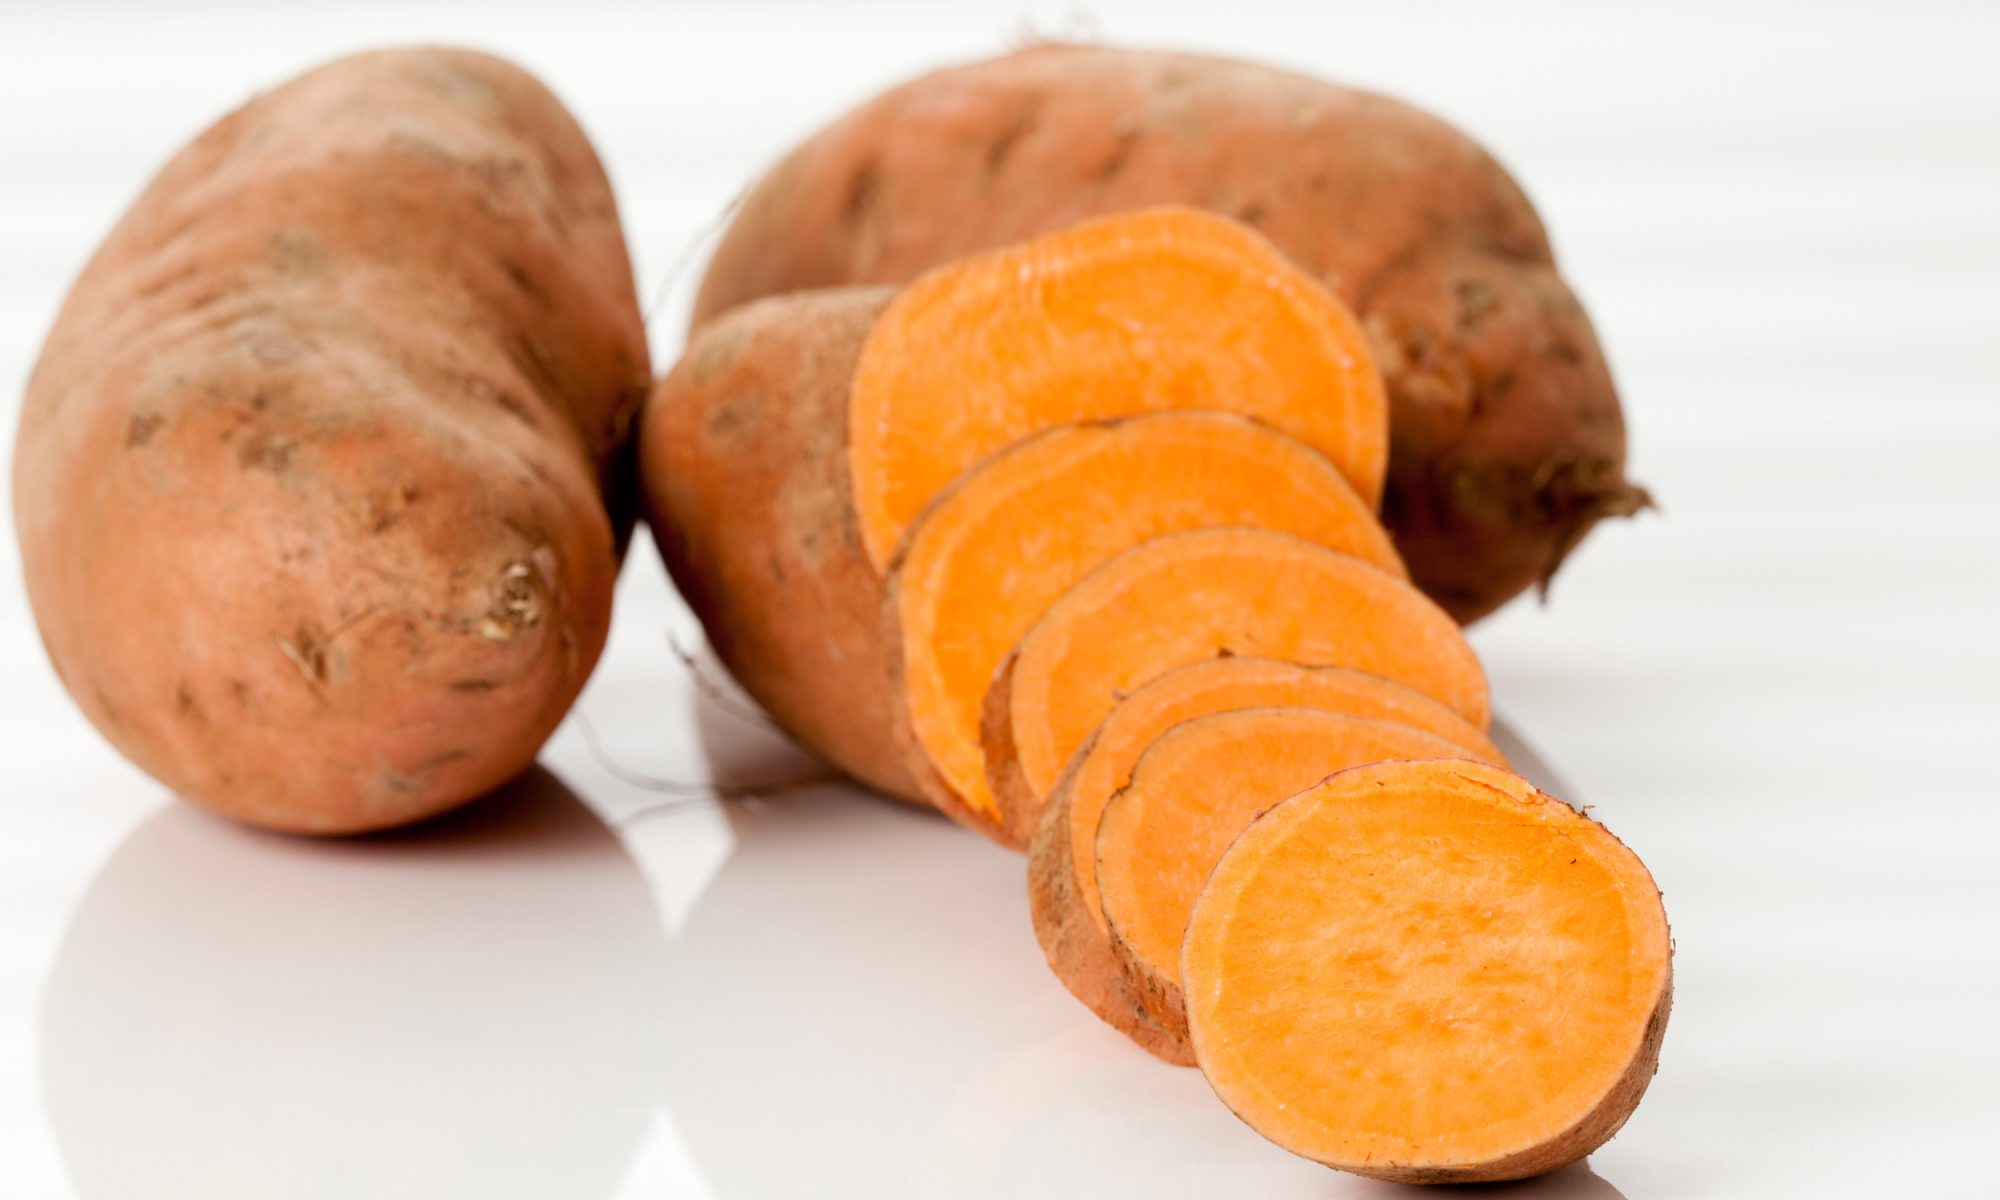 EC: The Difference Between Sweet and Regular Potatoes Boils Down to Science